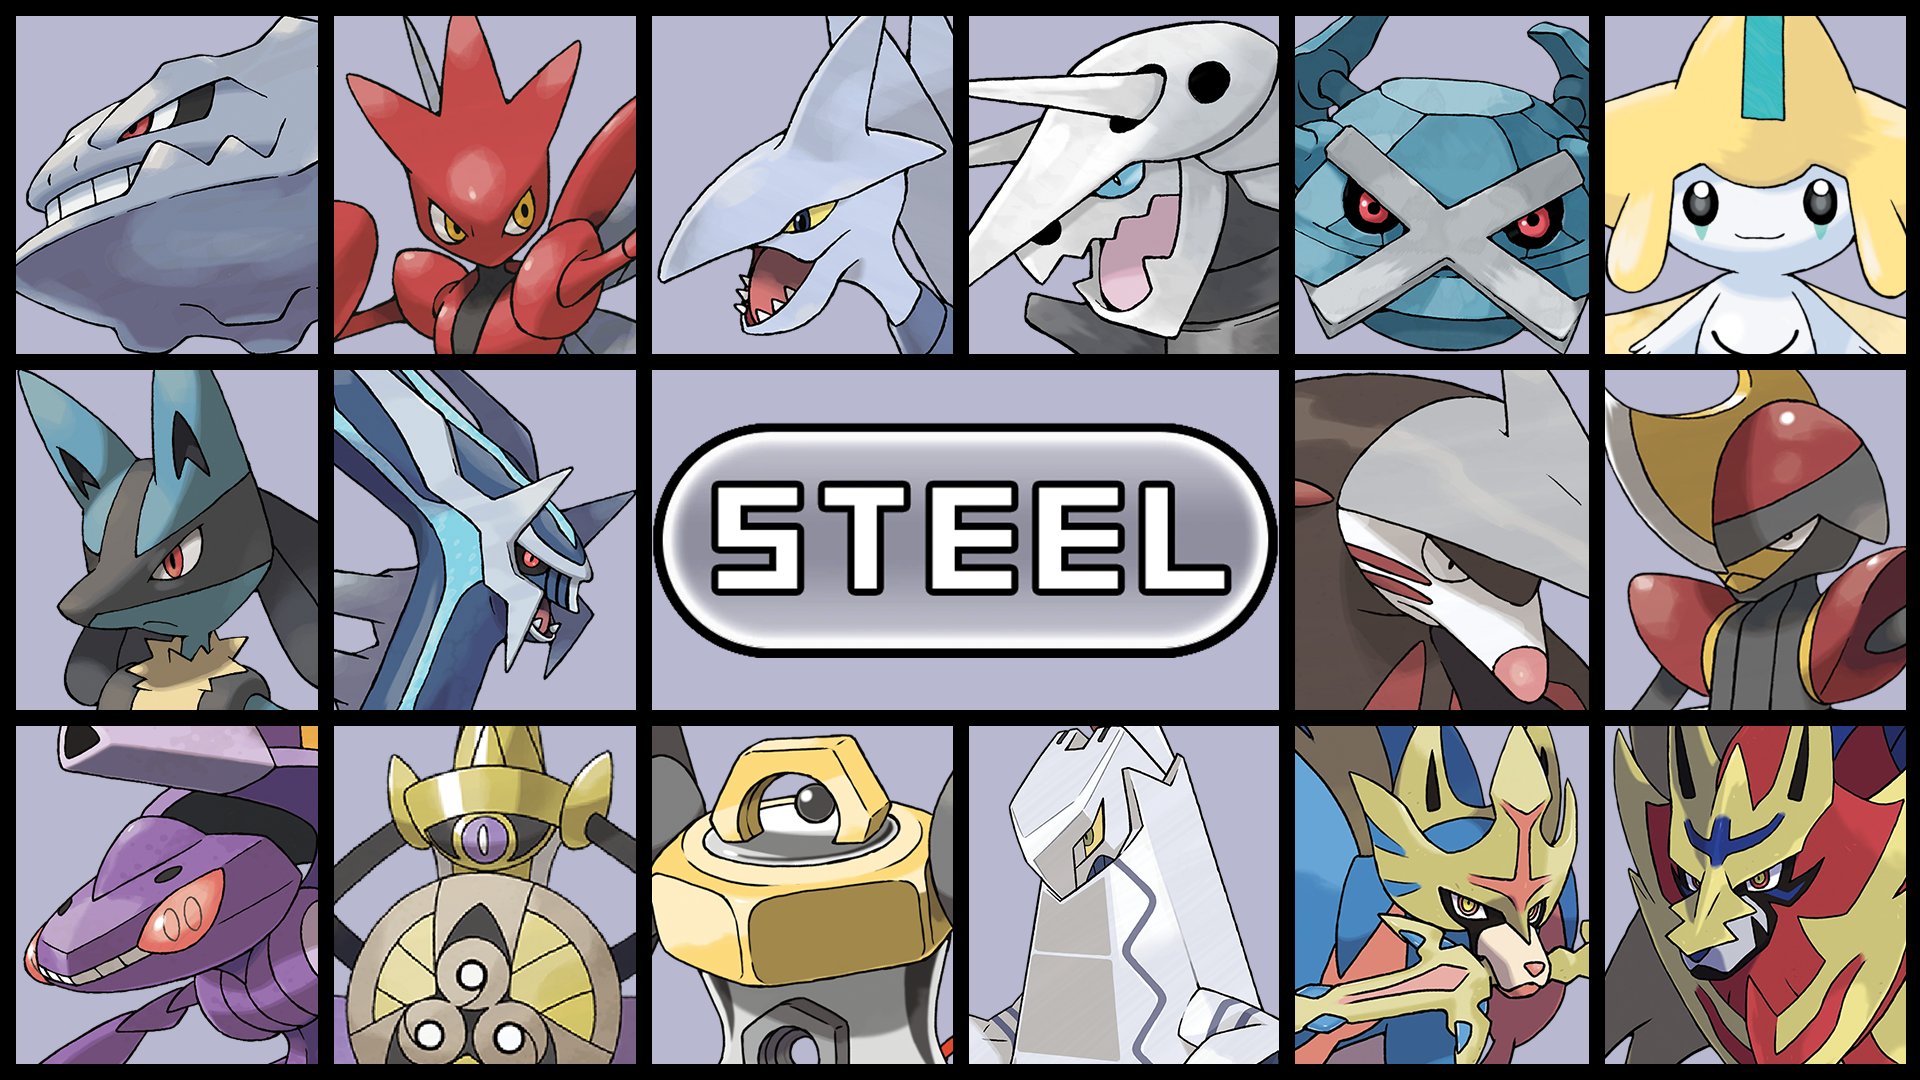 Pokemon Explained is your Favourite Steel Type #Pokemon? It can be any Steel Pokemon, they dont need to be in the image. Also I just uploaded a Steel Type